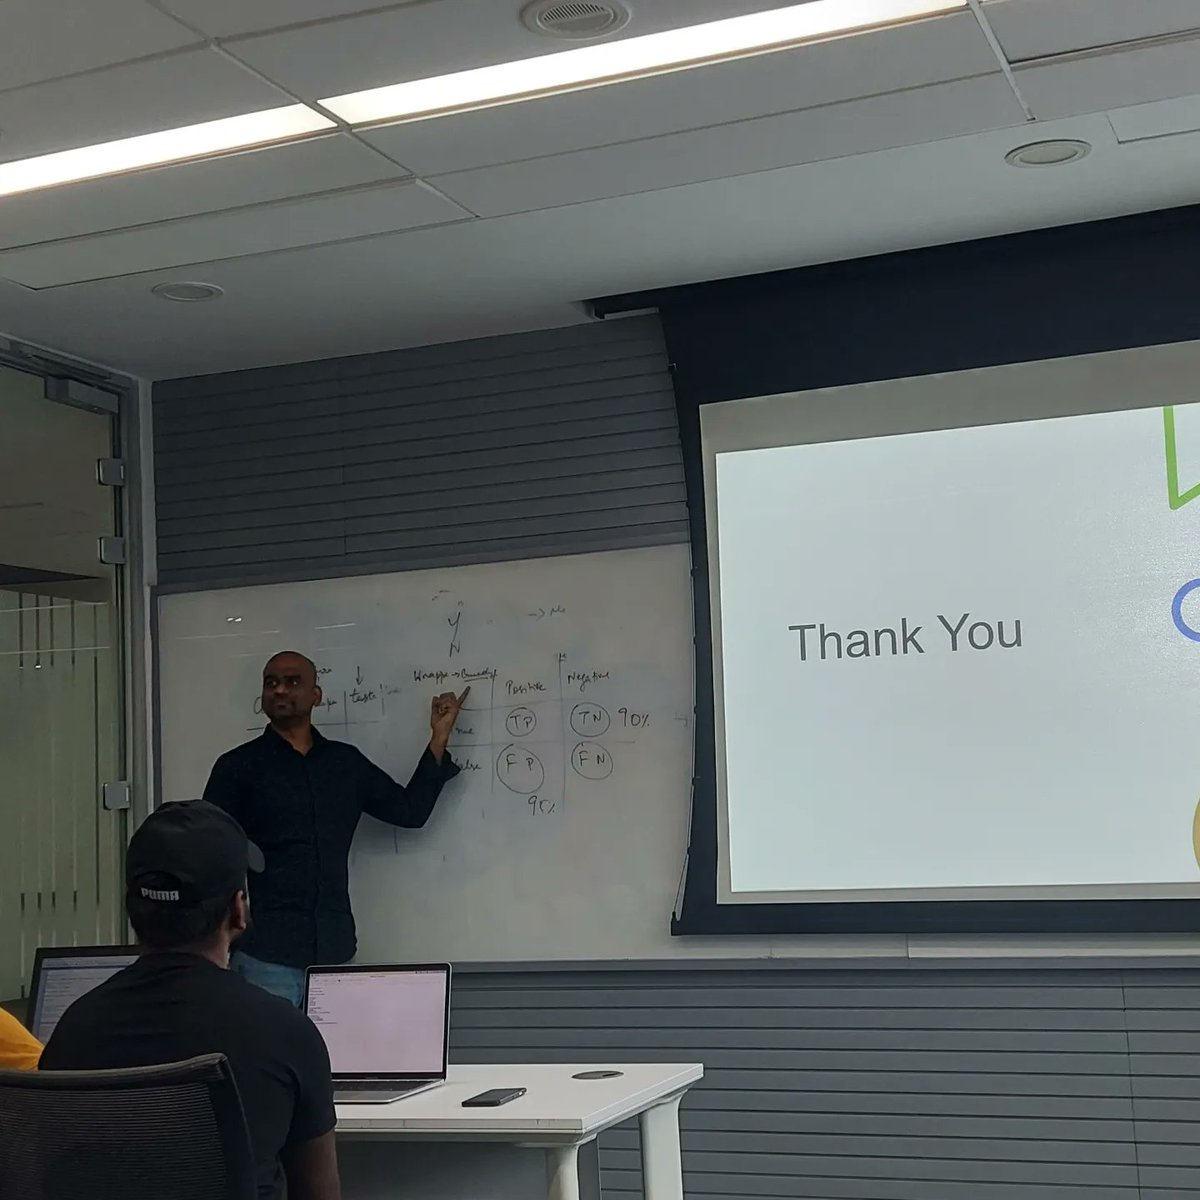 #thanks 

We would like to extend our sincere thanks to all of you who attended our Datascience in a Day workshop event. Your presence and participation made the event a great success.

@karthik3030

#datascience   #developersroadahead #technicalarchitects #softwarearchitect